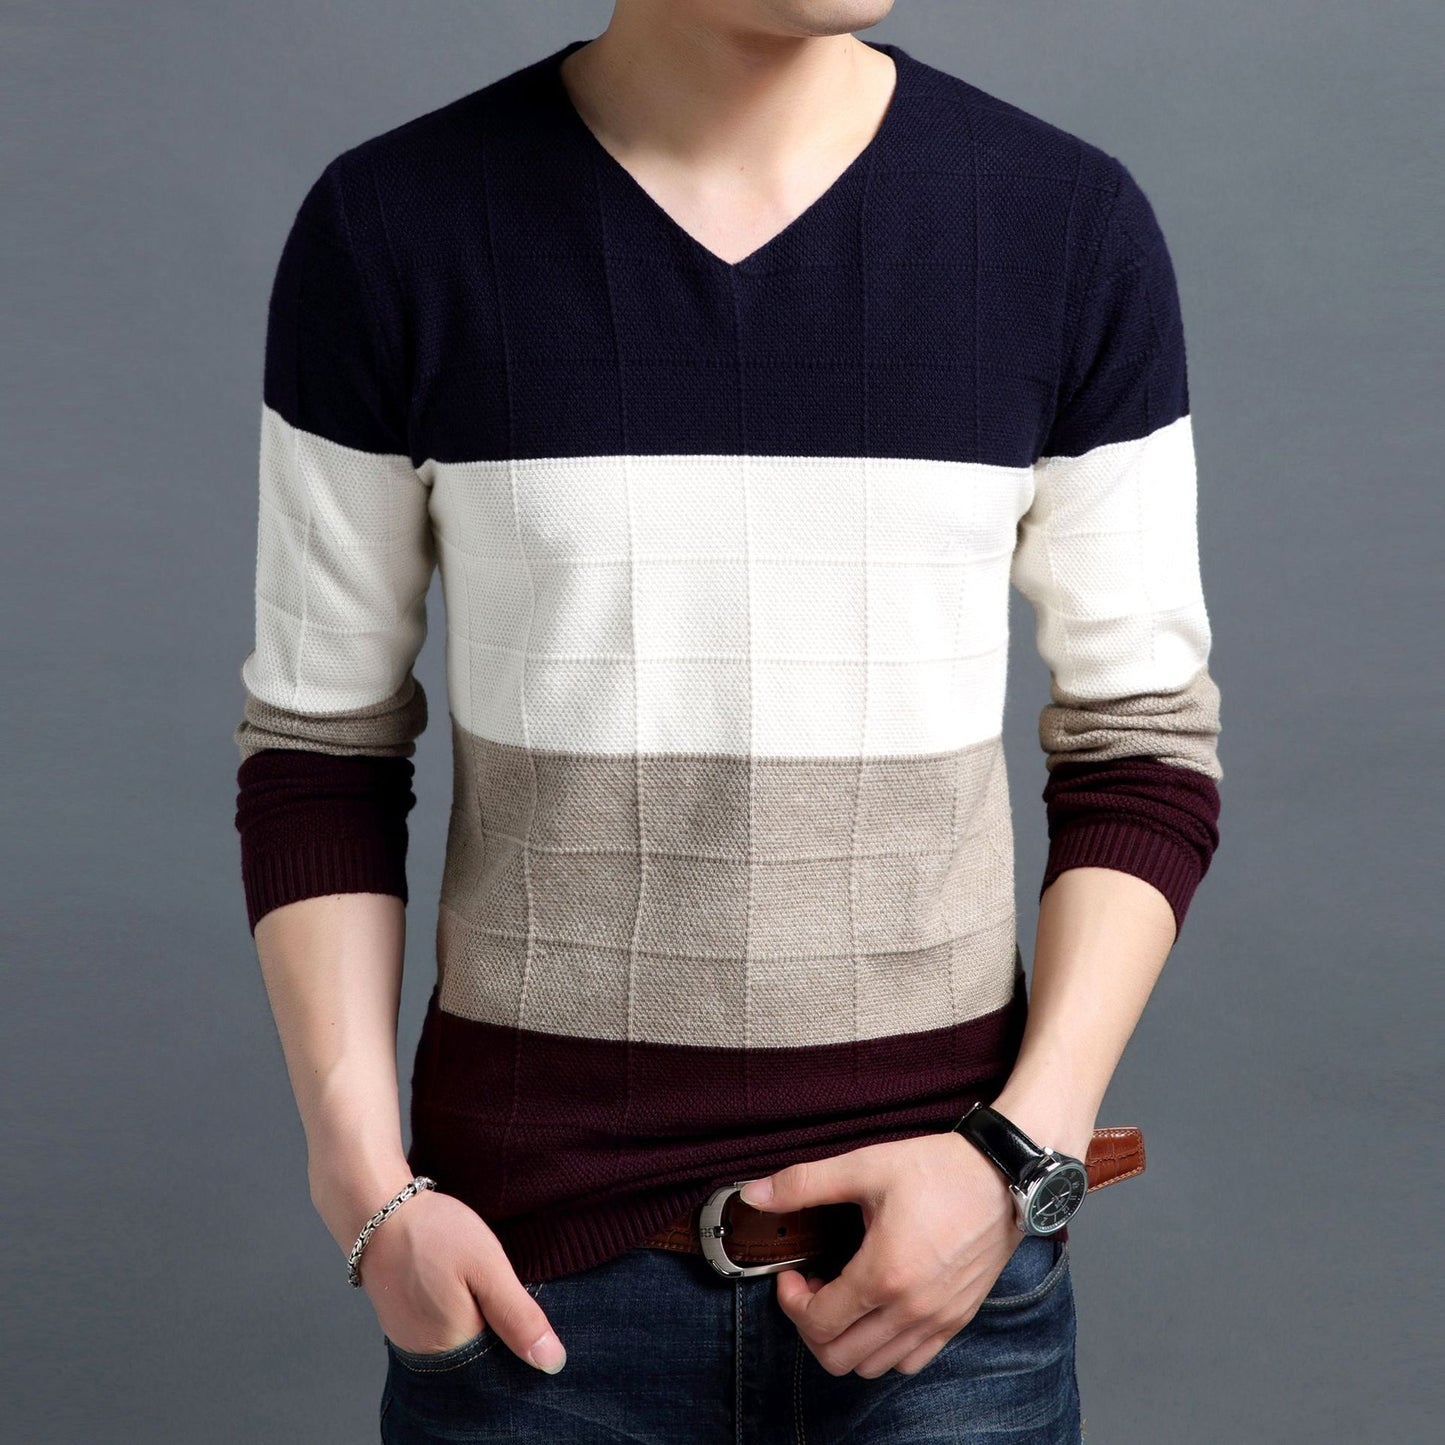 New Men Pullover Fashion V Neck Spring Autumn Slim Fit  Knit Patchwork Striped Male Sweater Casual Jumpers Outwear Full Sweater